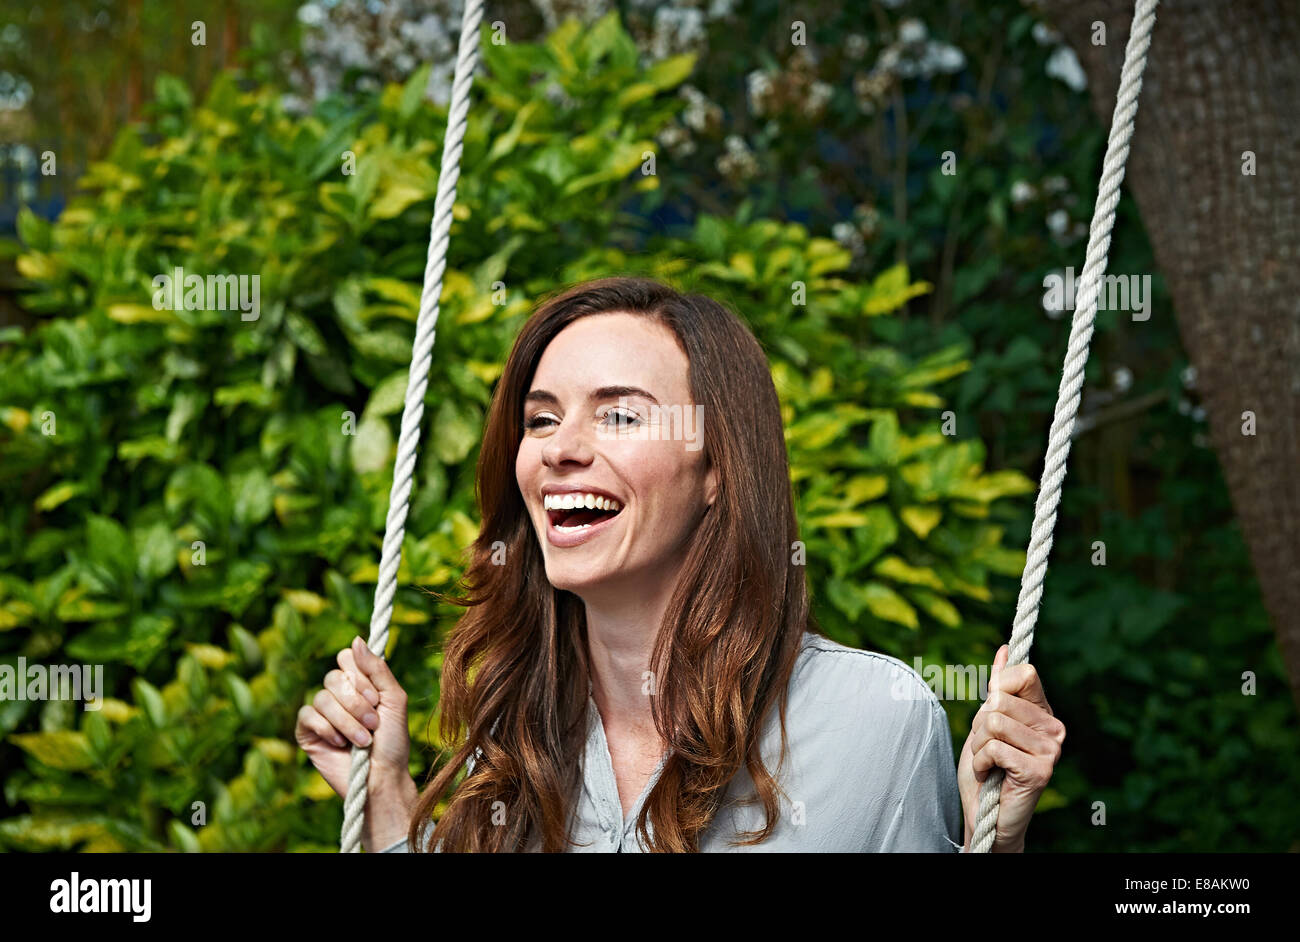 Woman laughing on swing Banque D'Images